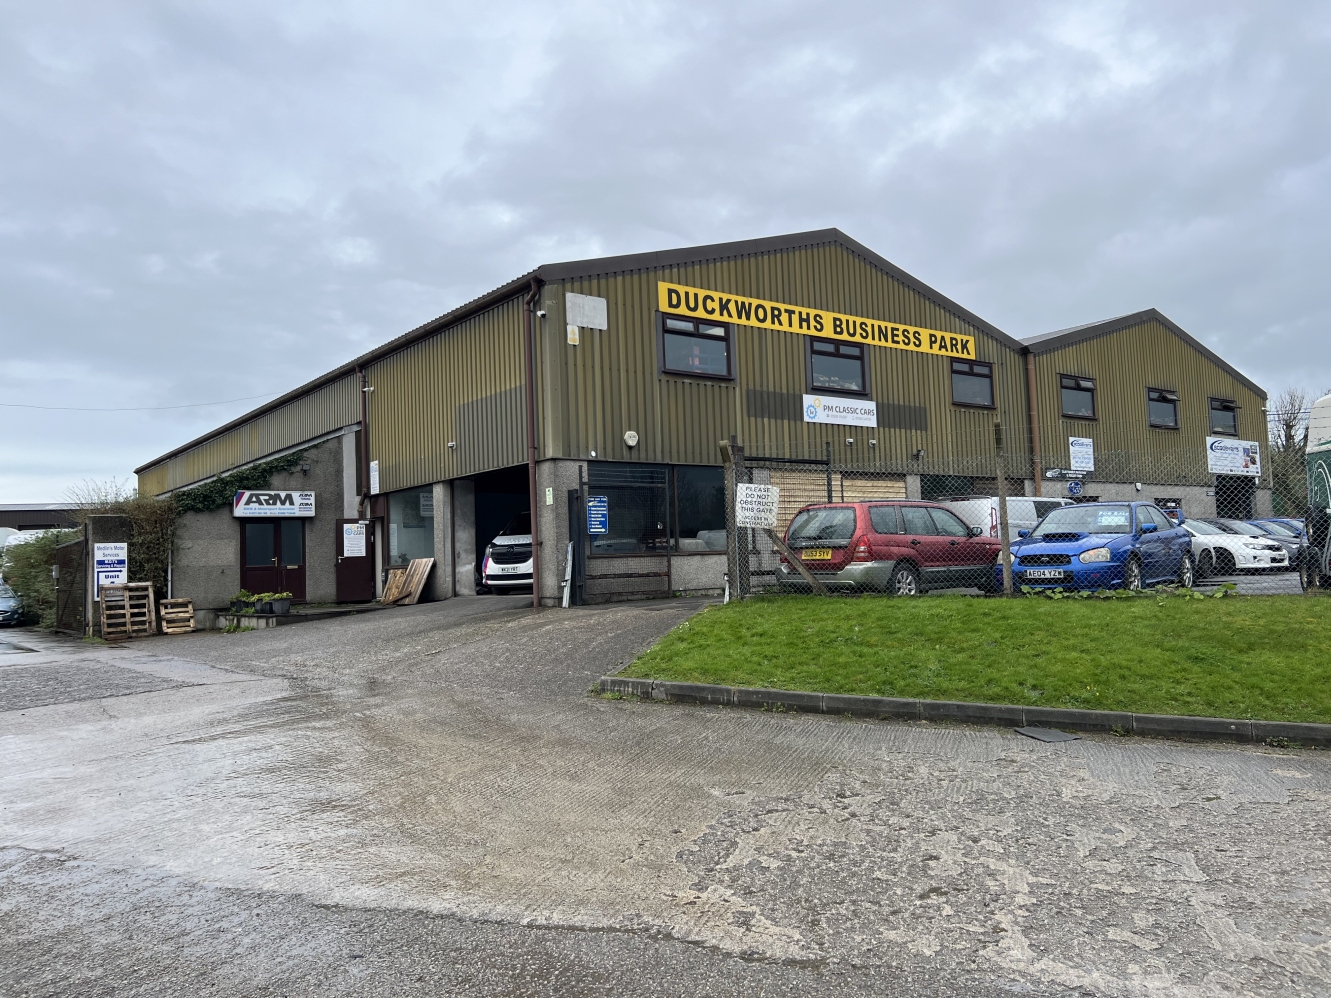 0 bed Light Industrial for rent in Truro. From Miller Commercial - Commercial